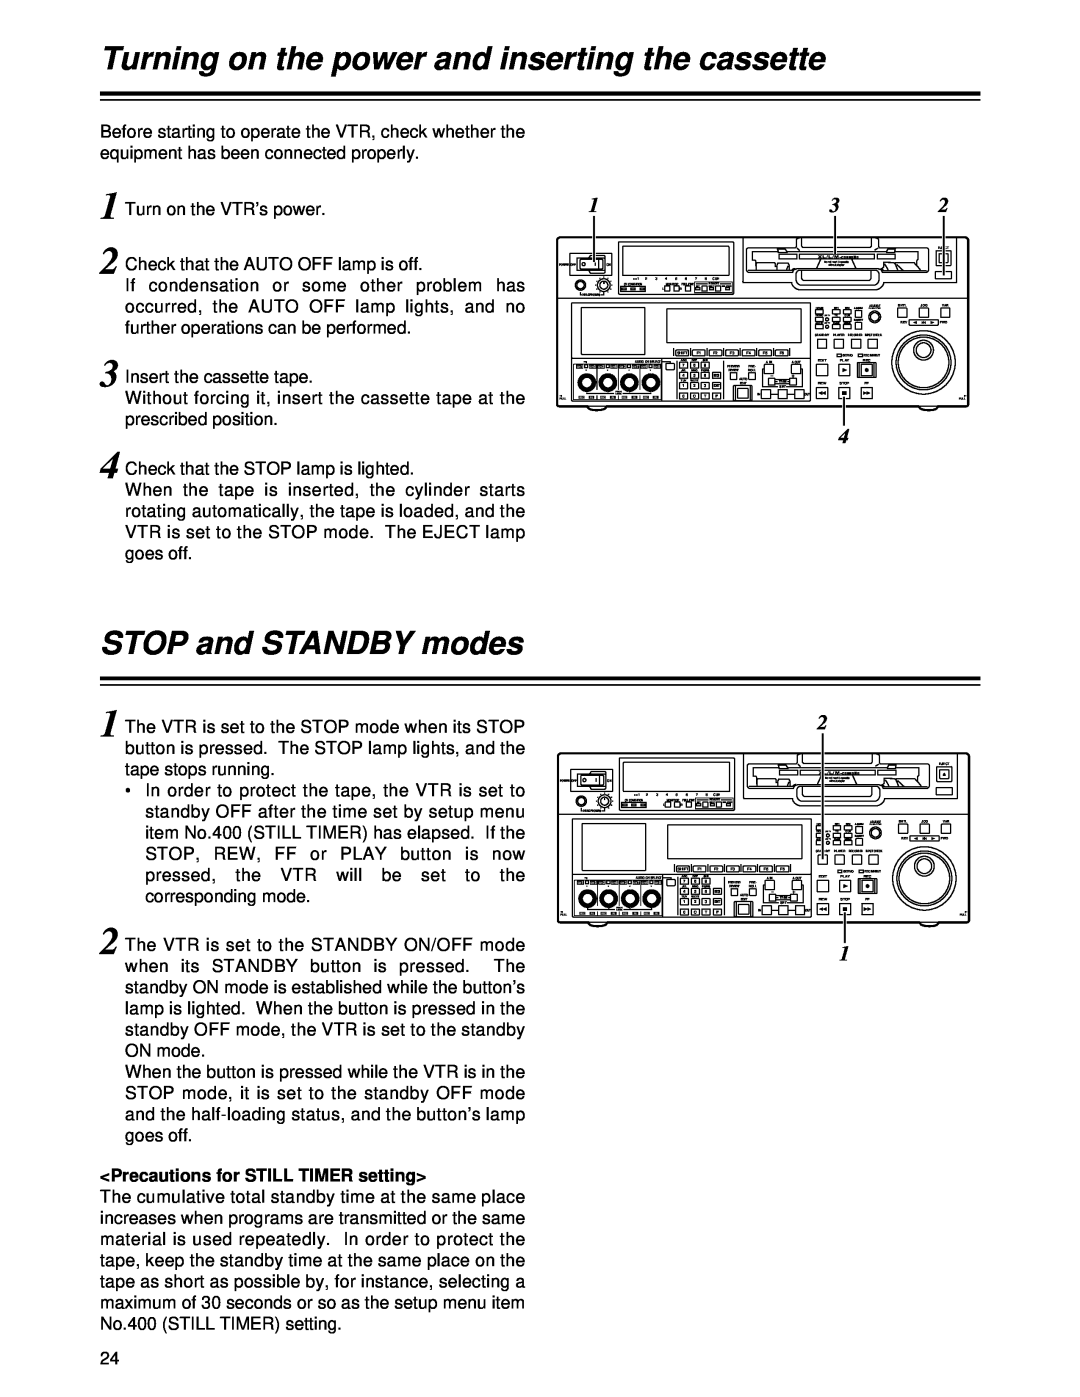 Panasonic AJ-HD1700PE Turning on the power and inserting the cassette, STOP and STANDBY modes, Insert the cassette tape 